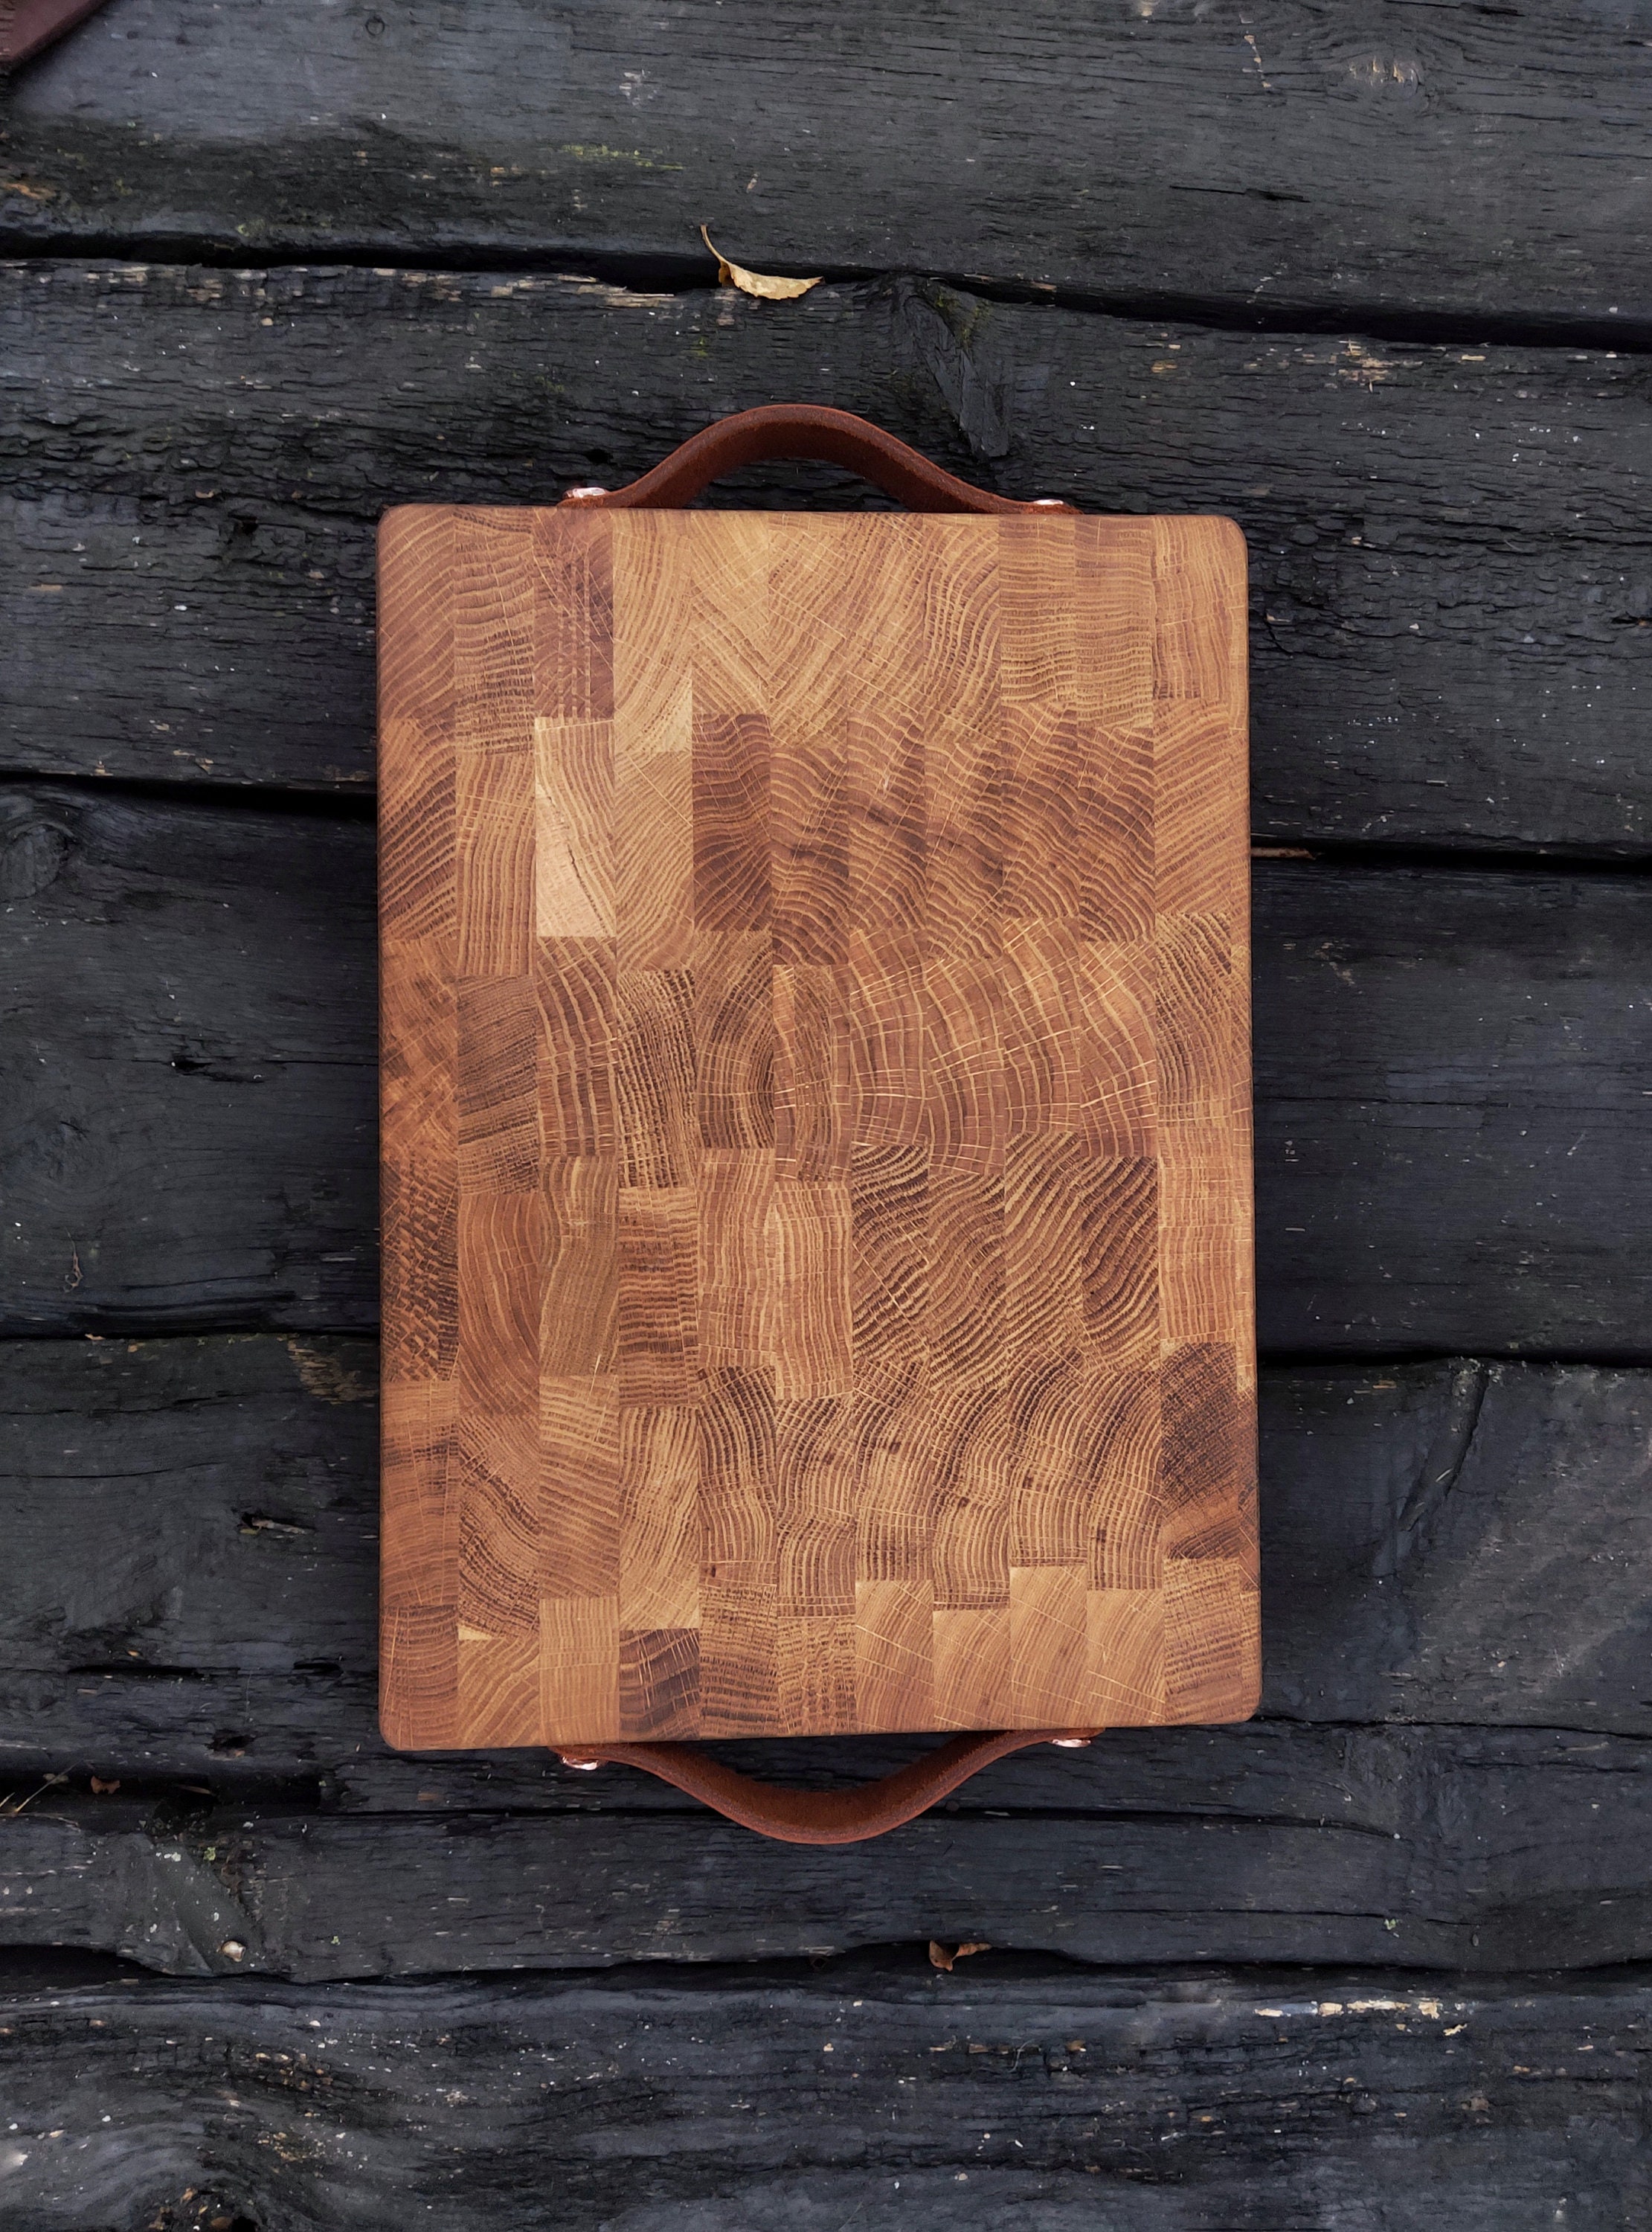 Organic Shape Cutting Board with Leather Loop Attached to Handle